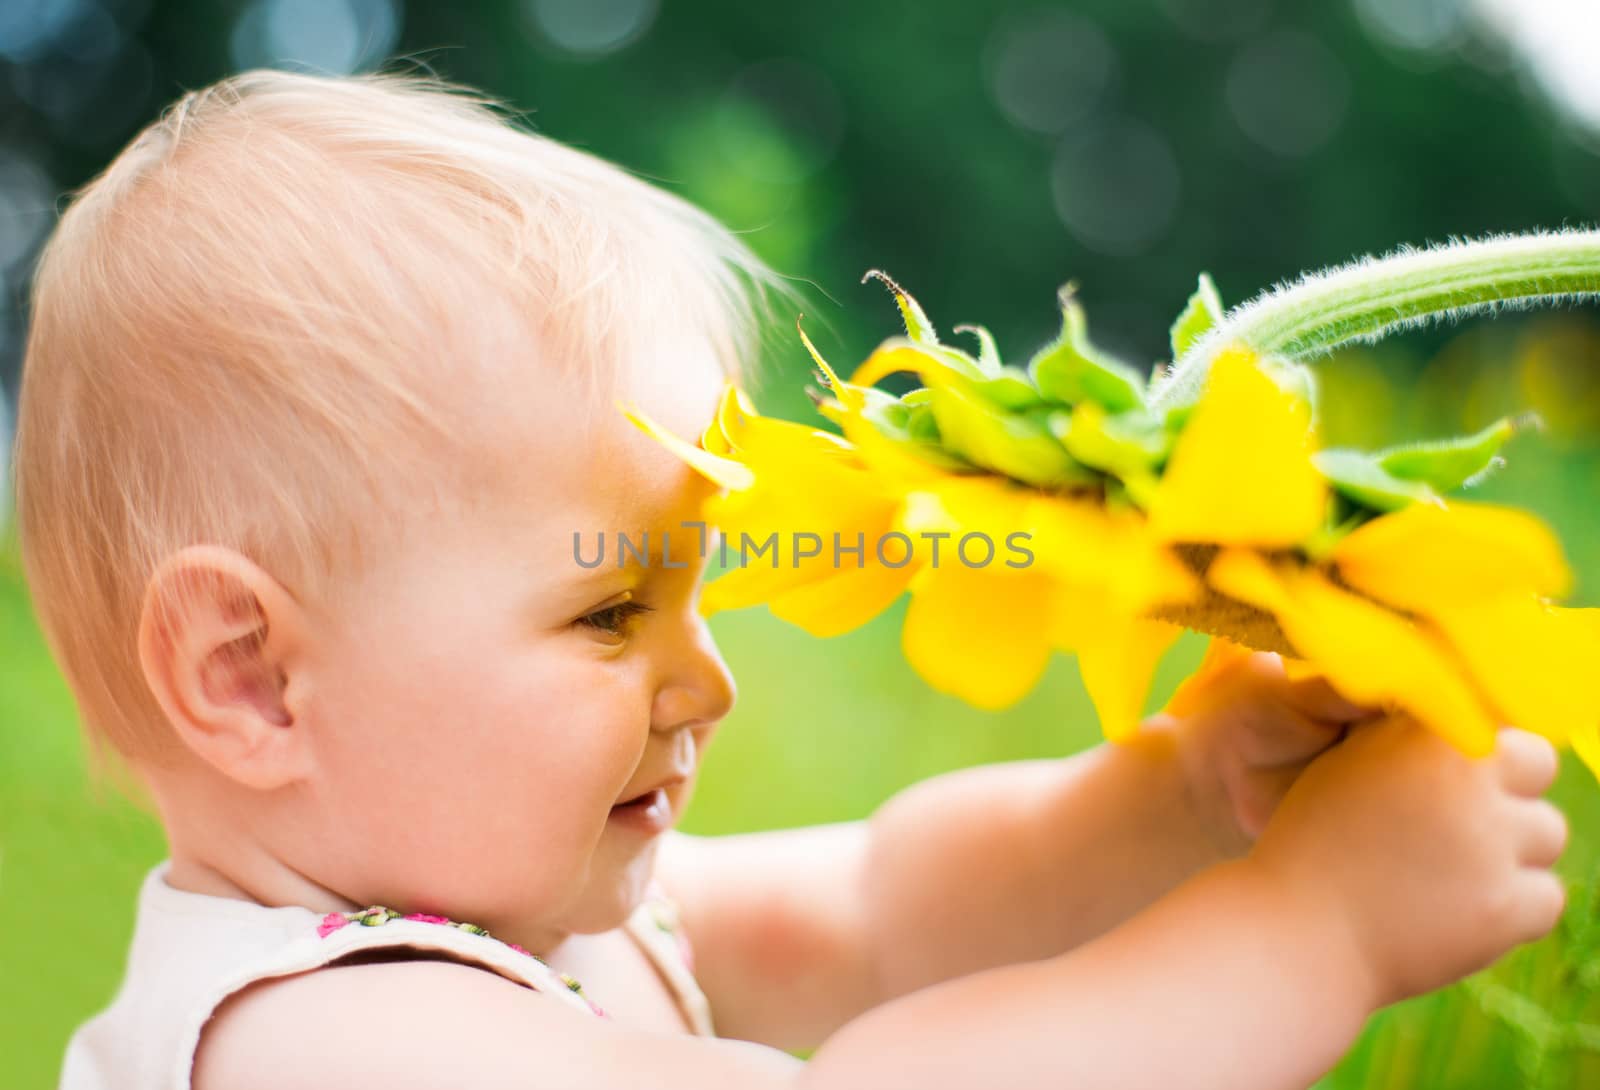 Cute baby with sunflower on summer field